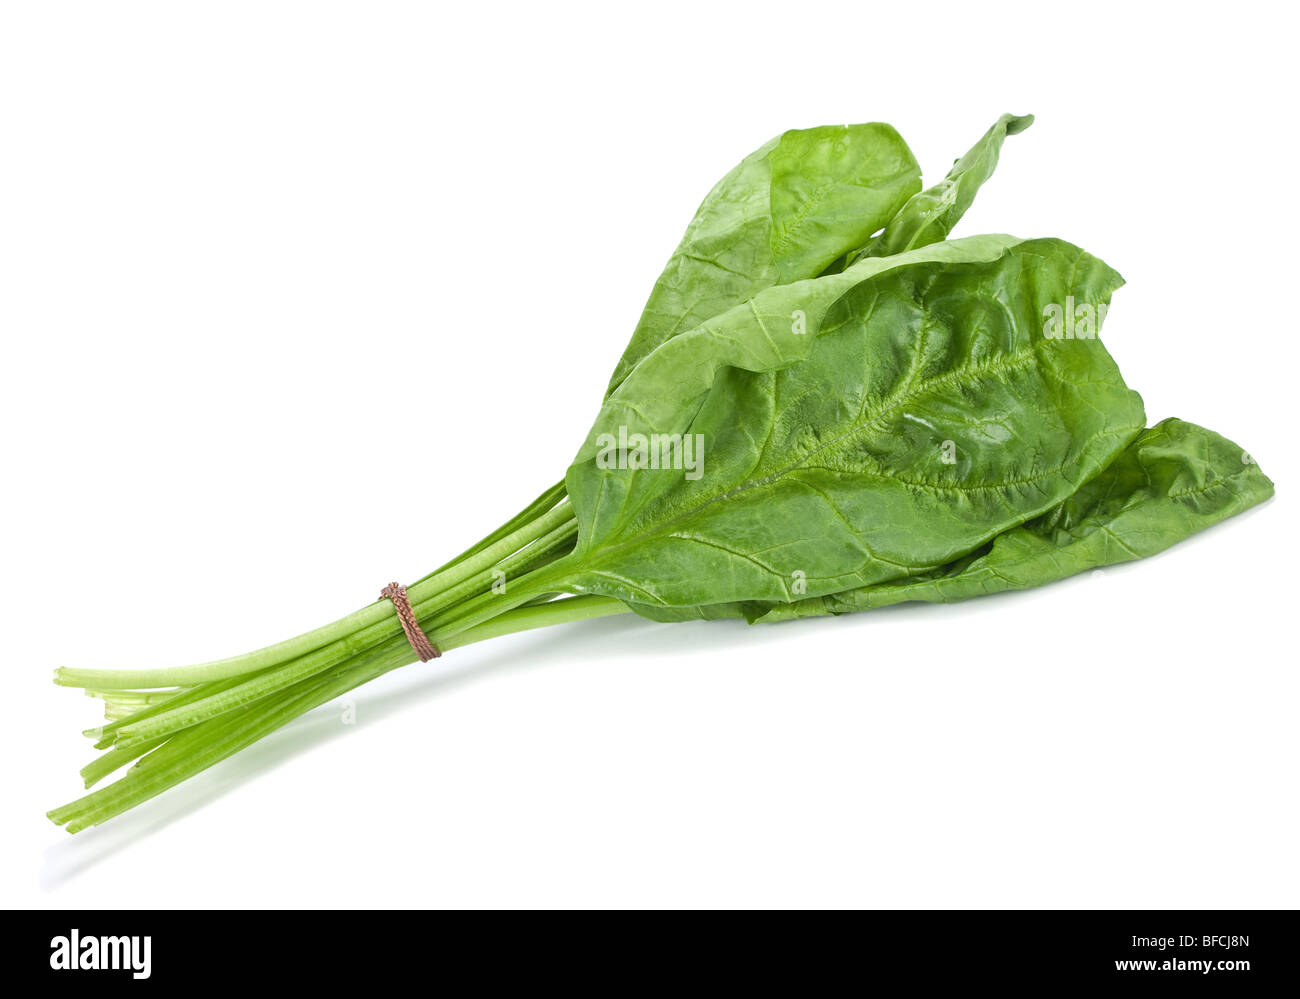 Spinach leaf with root on white background Stock Photo